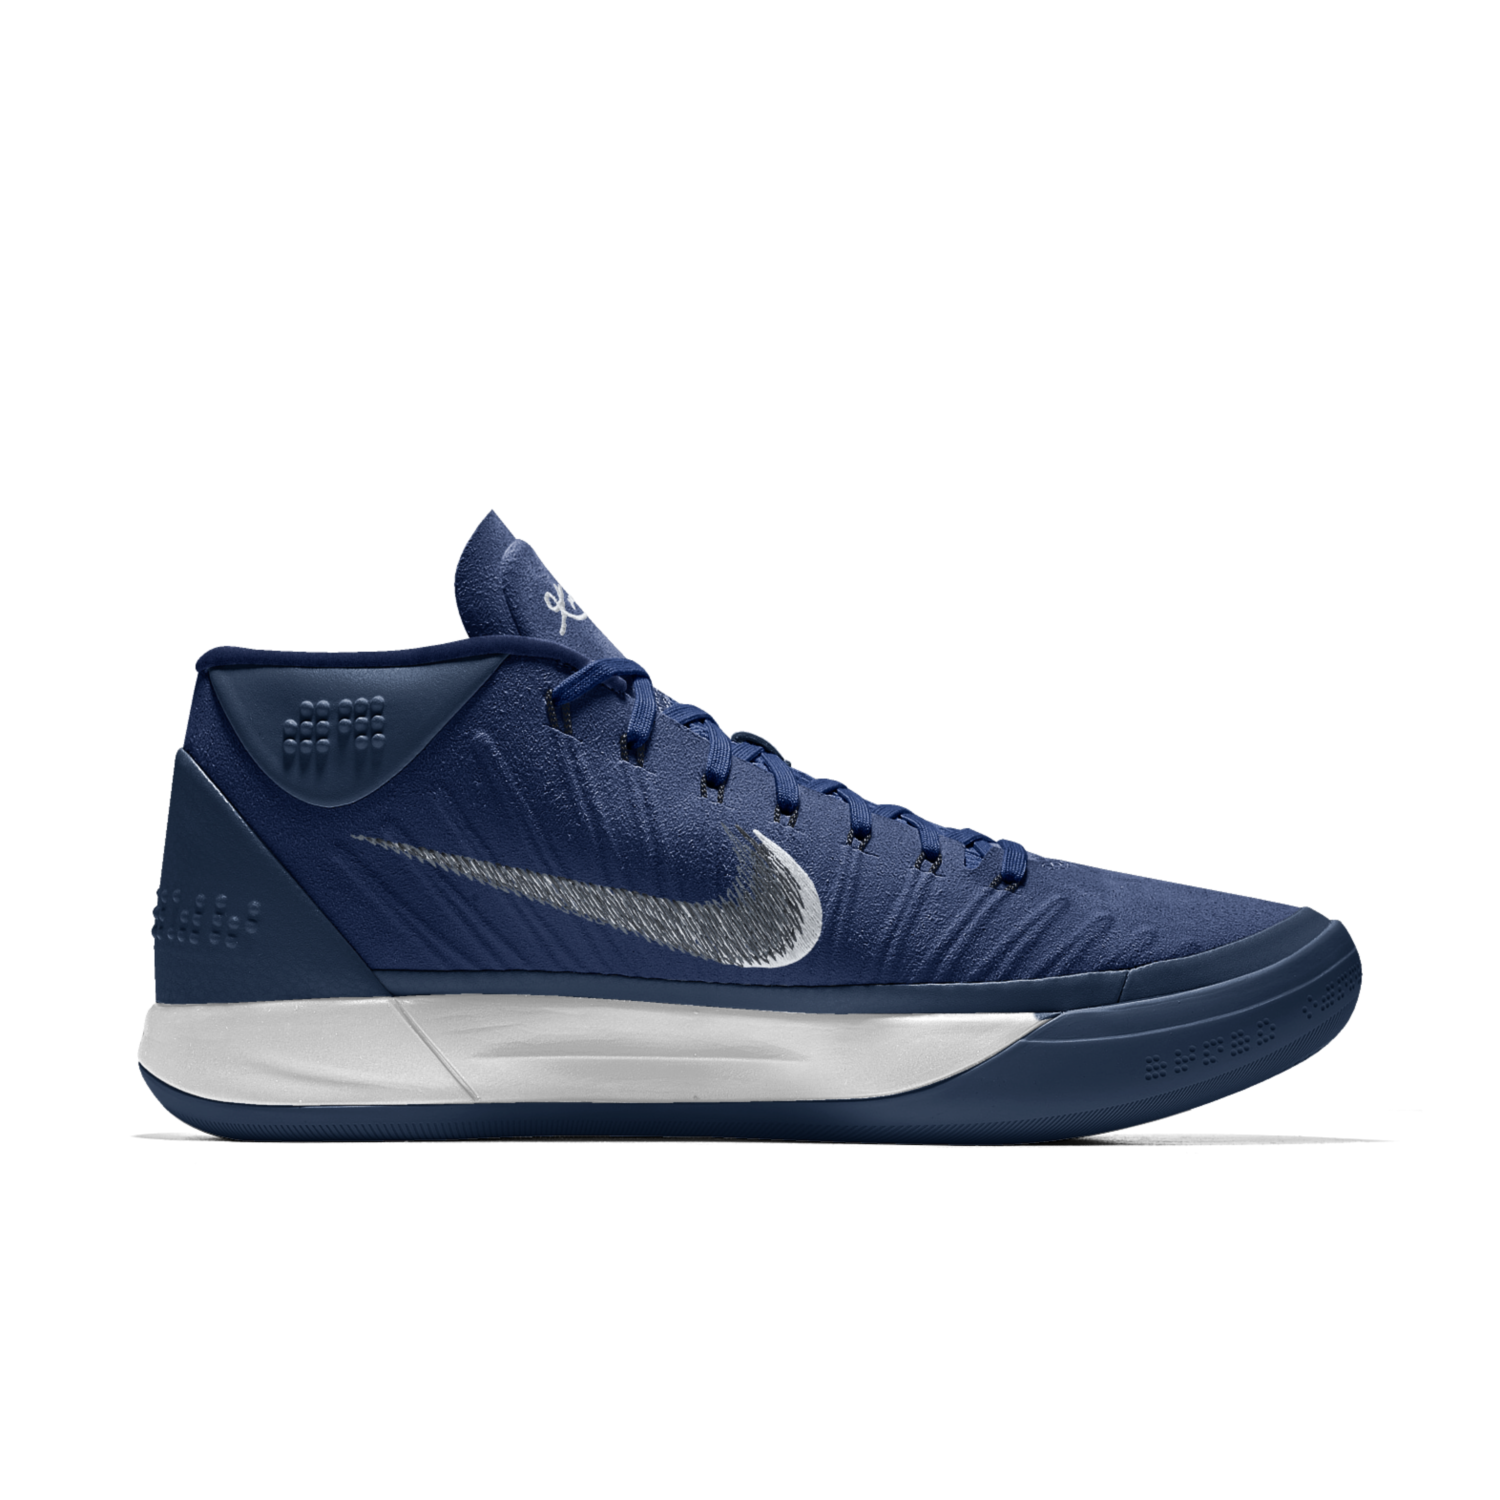 You Can Now Customize the Latest Nike Kobe AD on NIKEiD ...